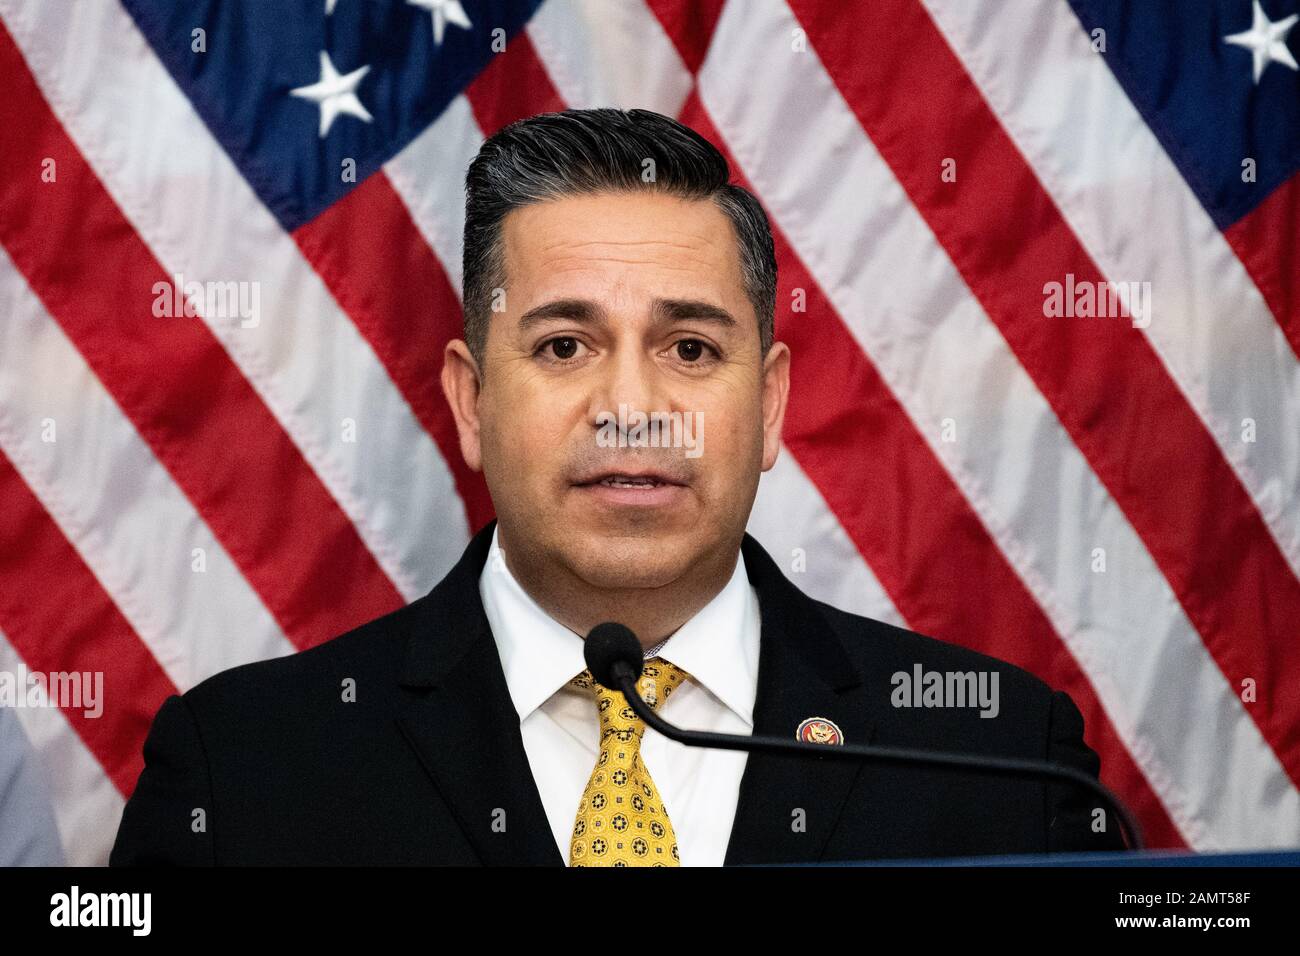 January 14, 2020 - Washington, DC, United States:  U.S. Representative Ben Lujan (D-NM) speaking at an event for the ten year anniversary of the Citizens United Decision. (Photo by Michael Brochstein/Sipa USA) Stock Photo